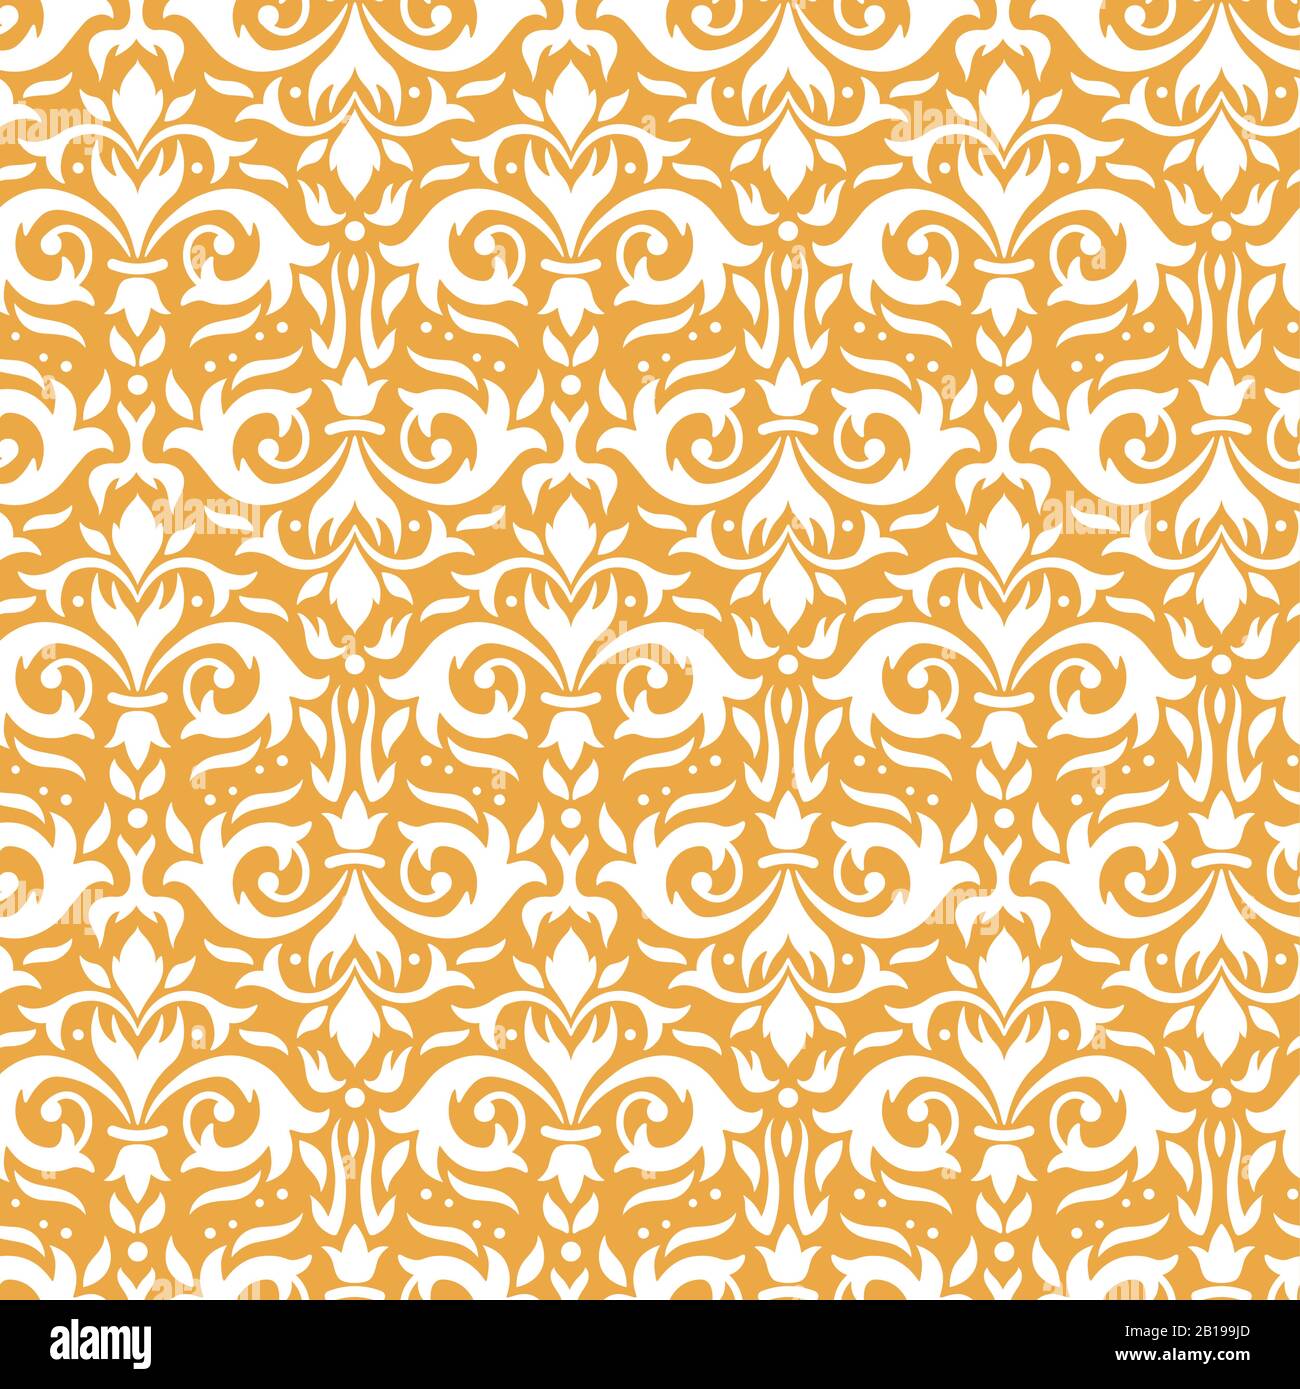 Elegant damask pattern. Ornate floral sprigs, golden baroque ornament and luxury ornamental flowers seamless vector background Stock Vector